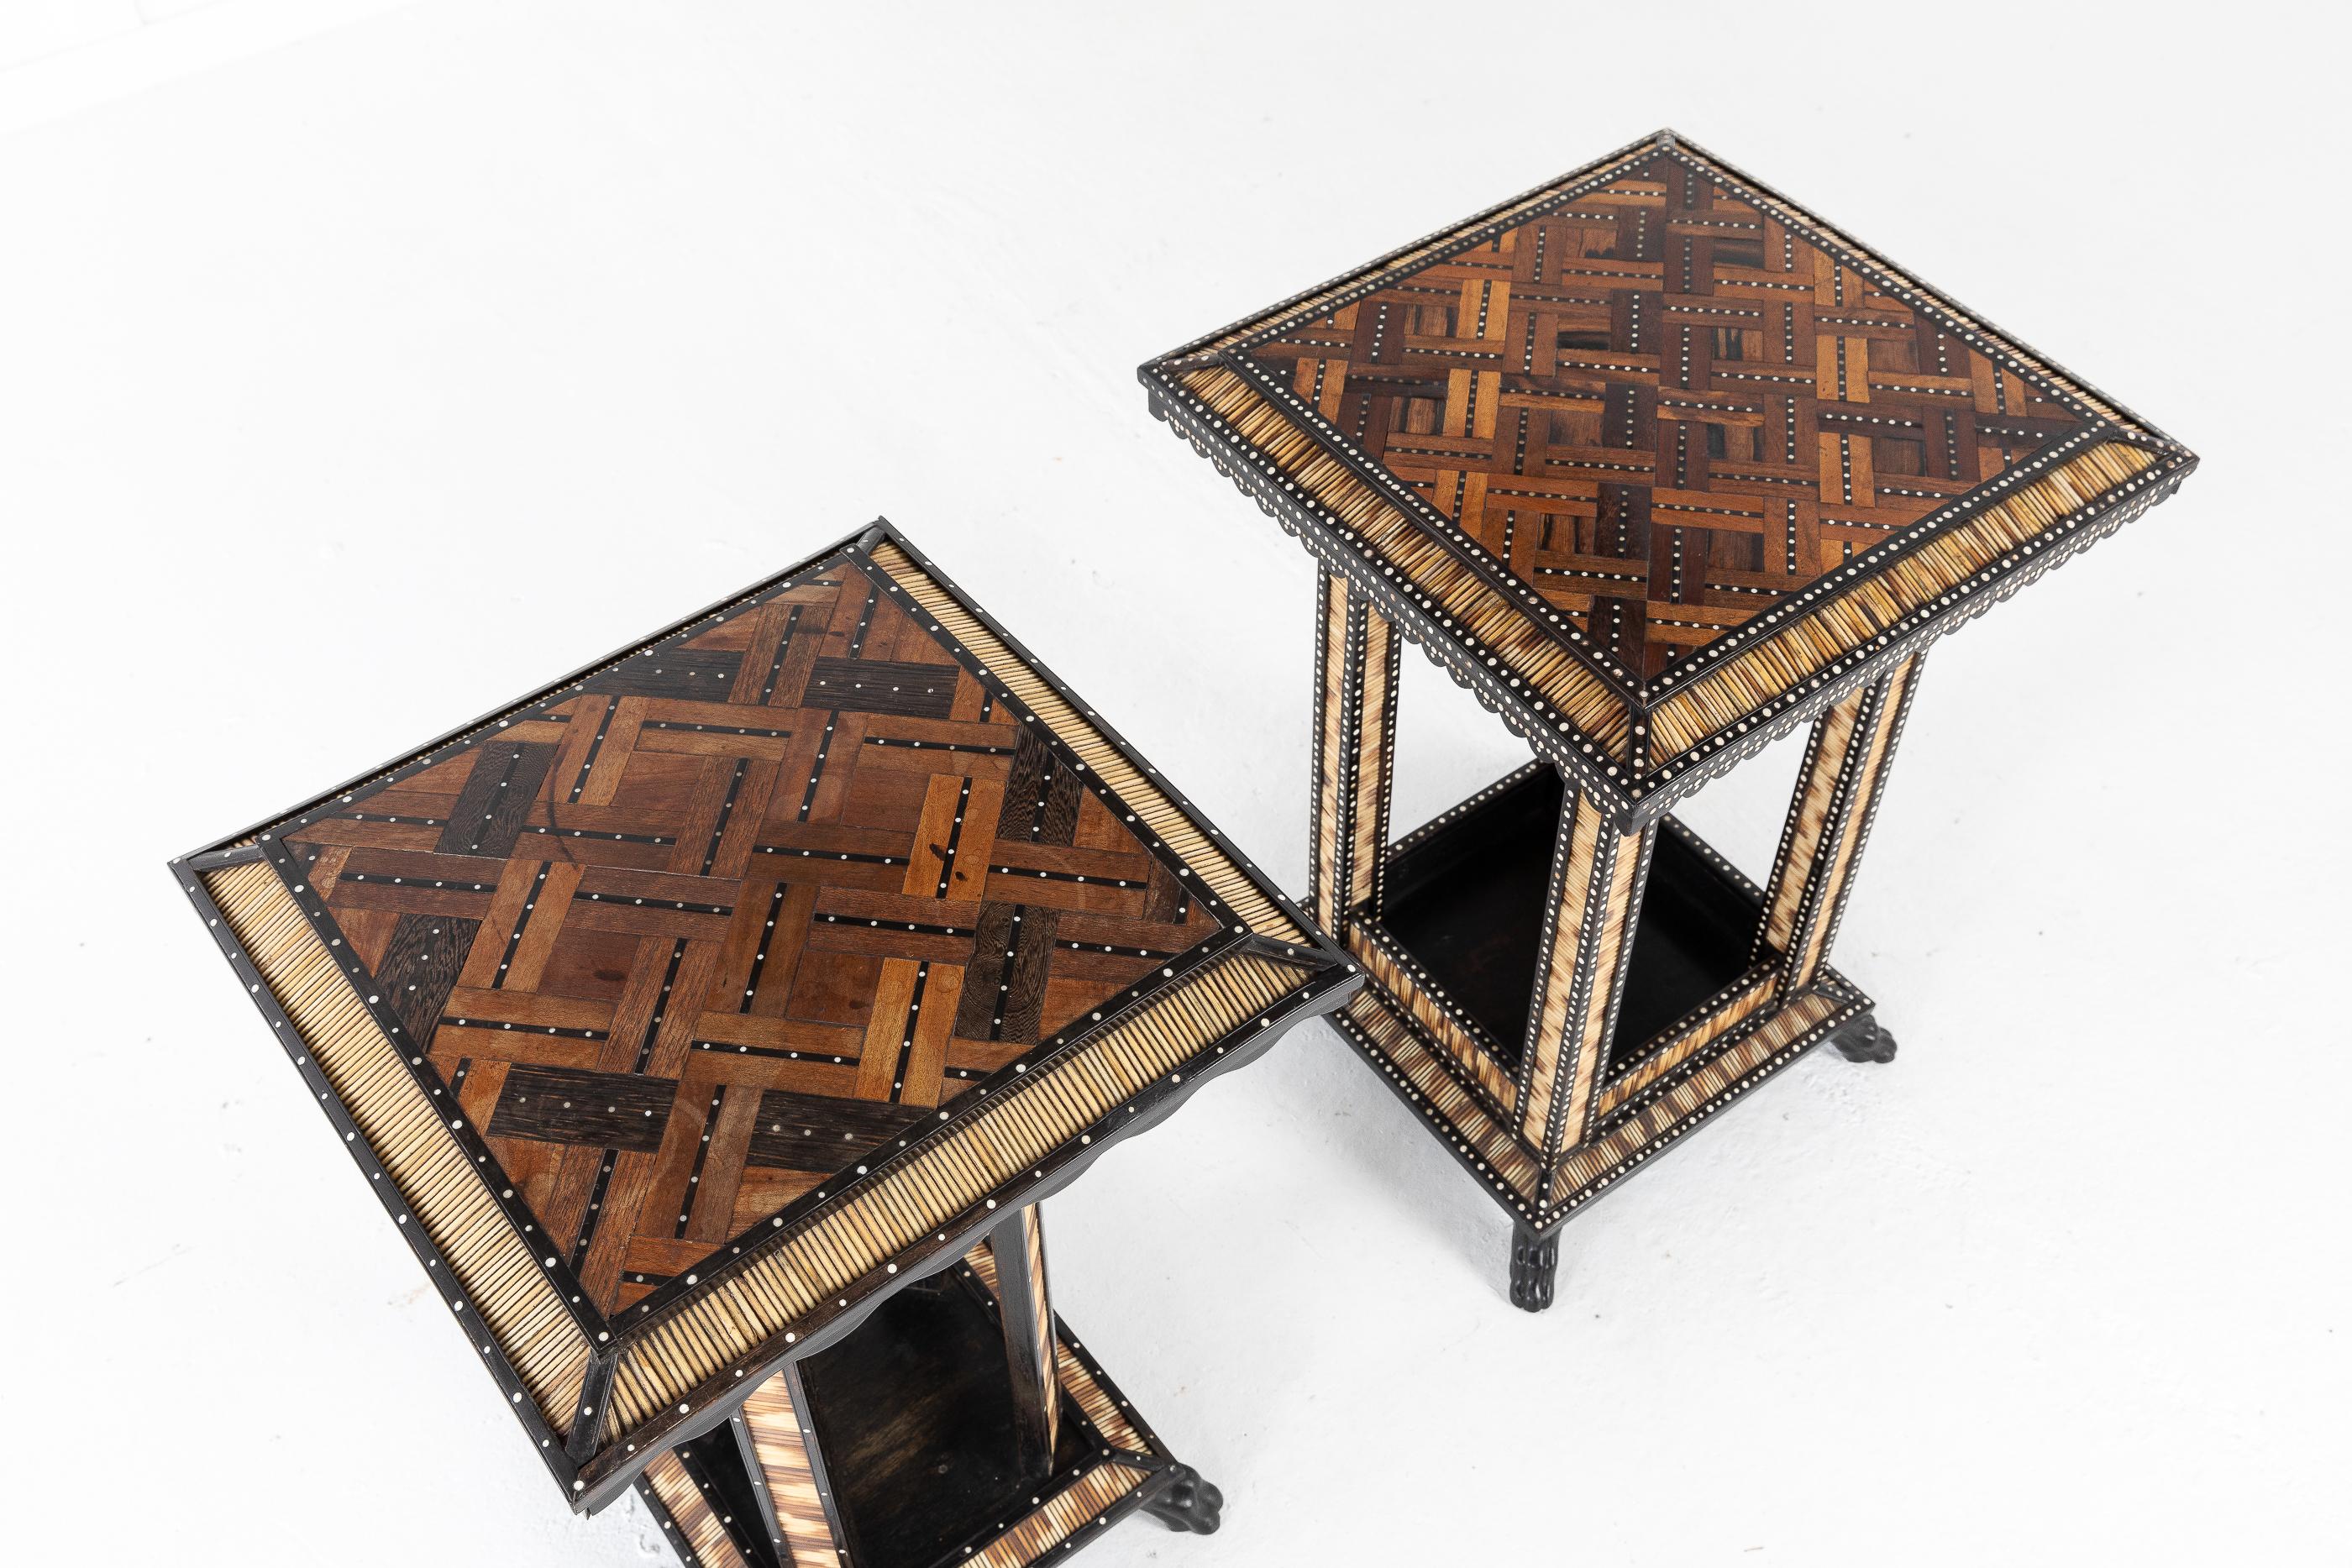 19th century, matched pair of Ceylonese, ebony and ebonized, bone inlaid occasional tables with porcupine quills. Inlaid specimen wood tops.

These tables were fully restored in our workshops, replacing all the missing quills and bone using quill